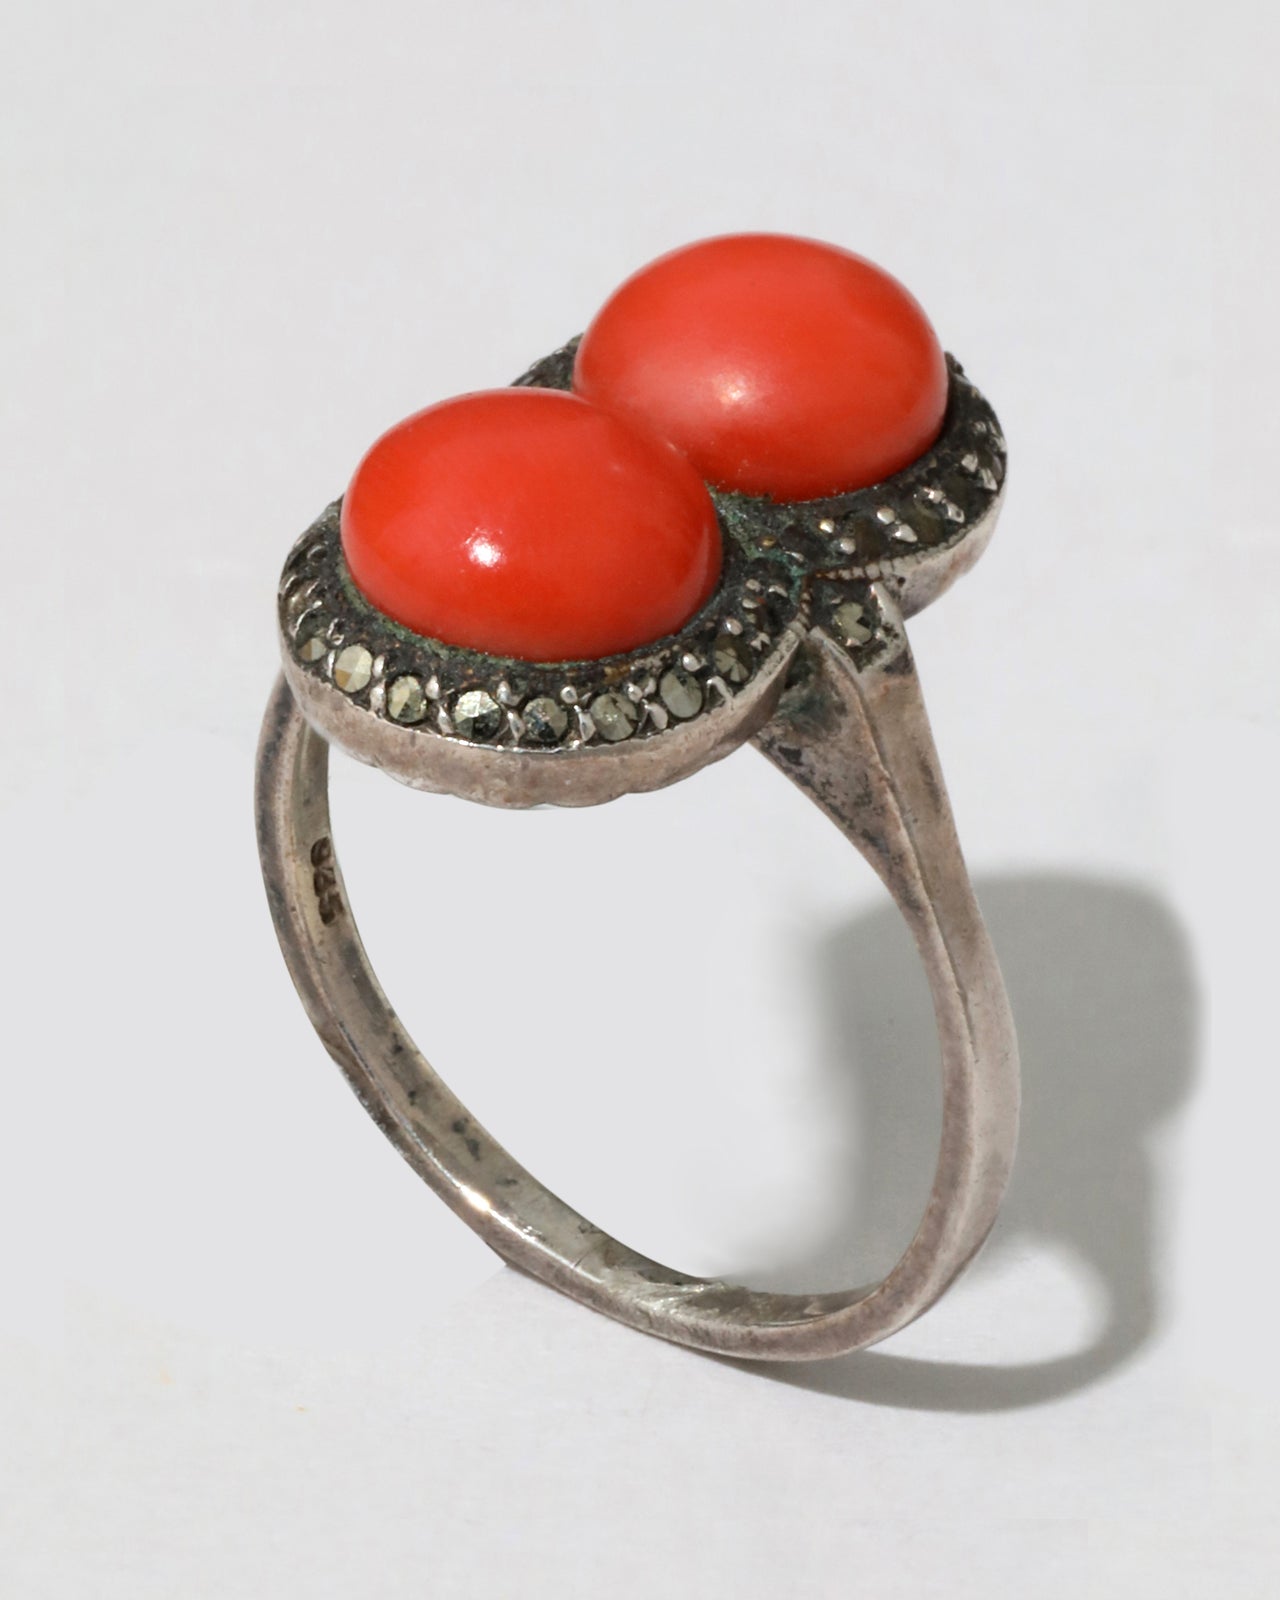 Antique Art Deco Sterling Silver and Stacked Coral Ring with Marcasite - Photo 2